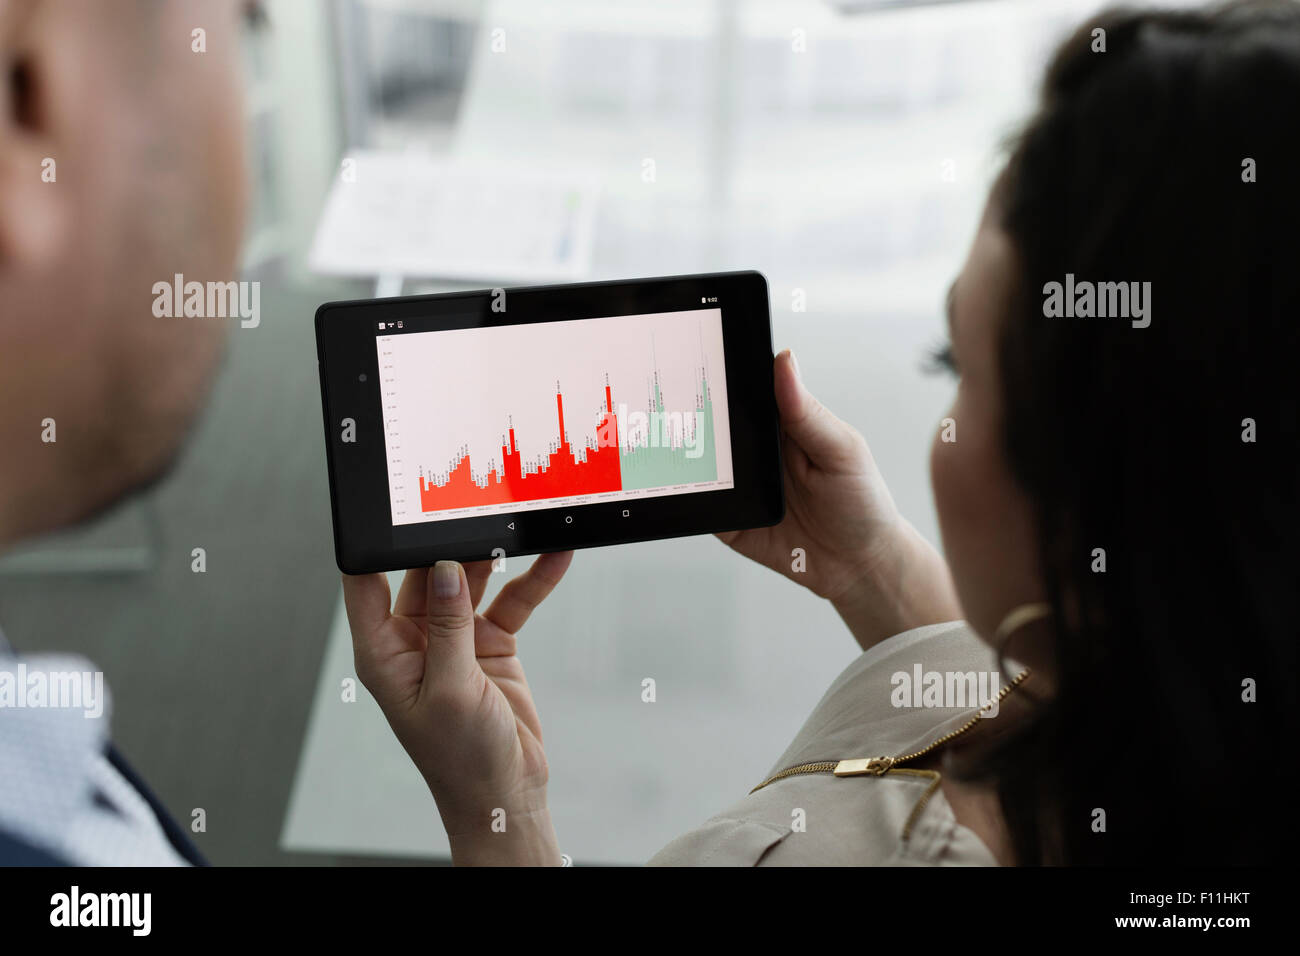 Business people viewing graph on digital tablet Stock Photo